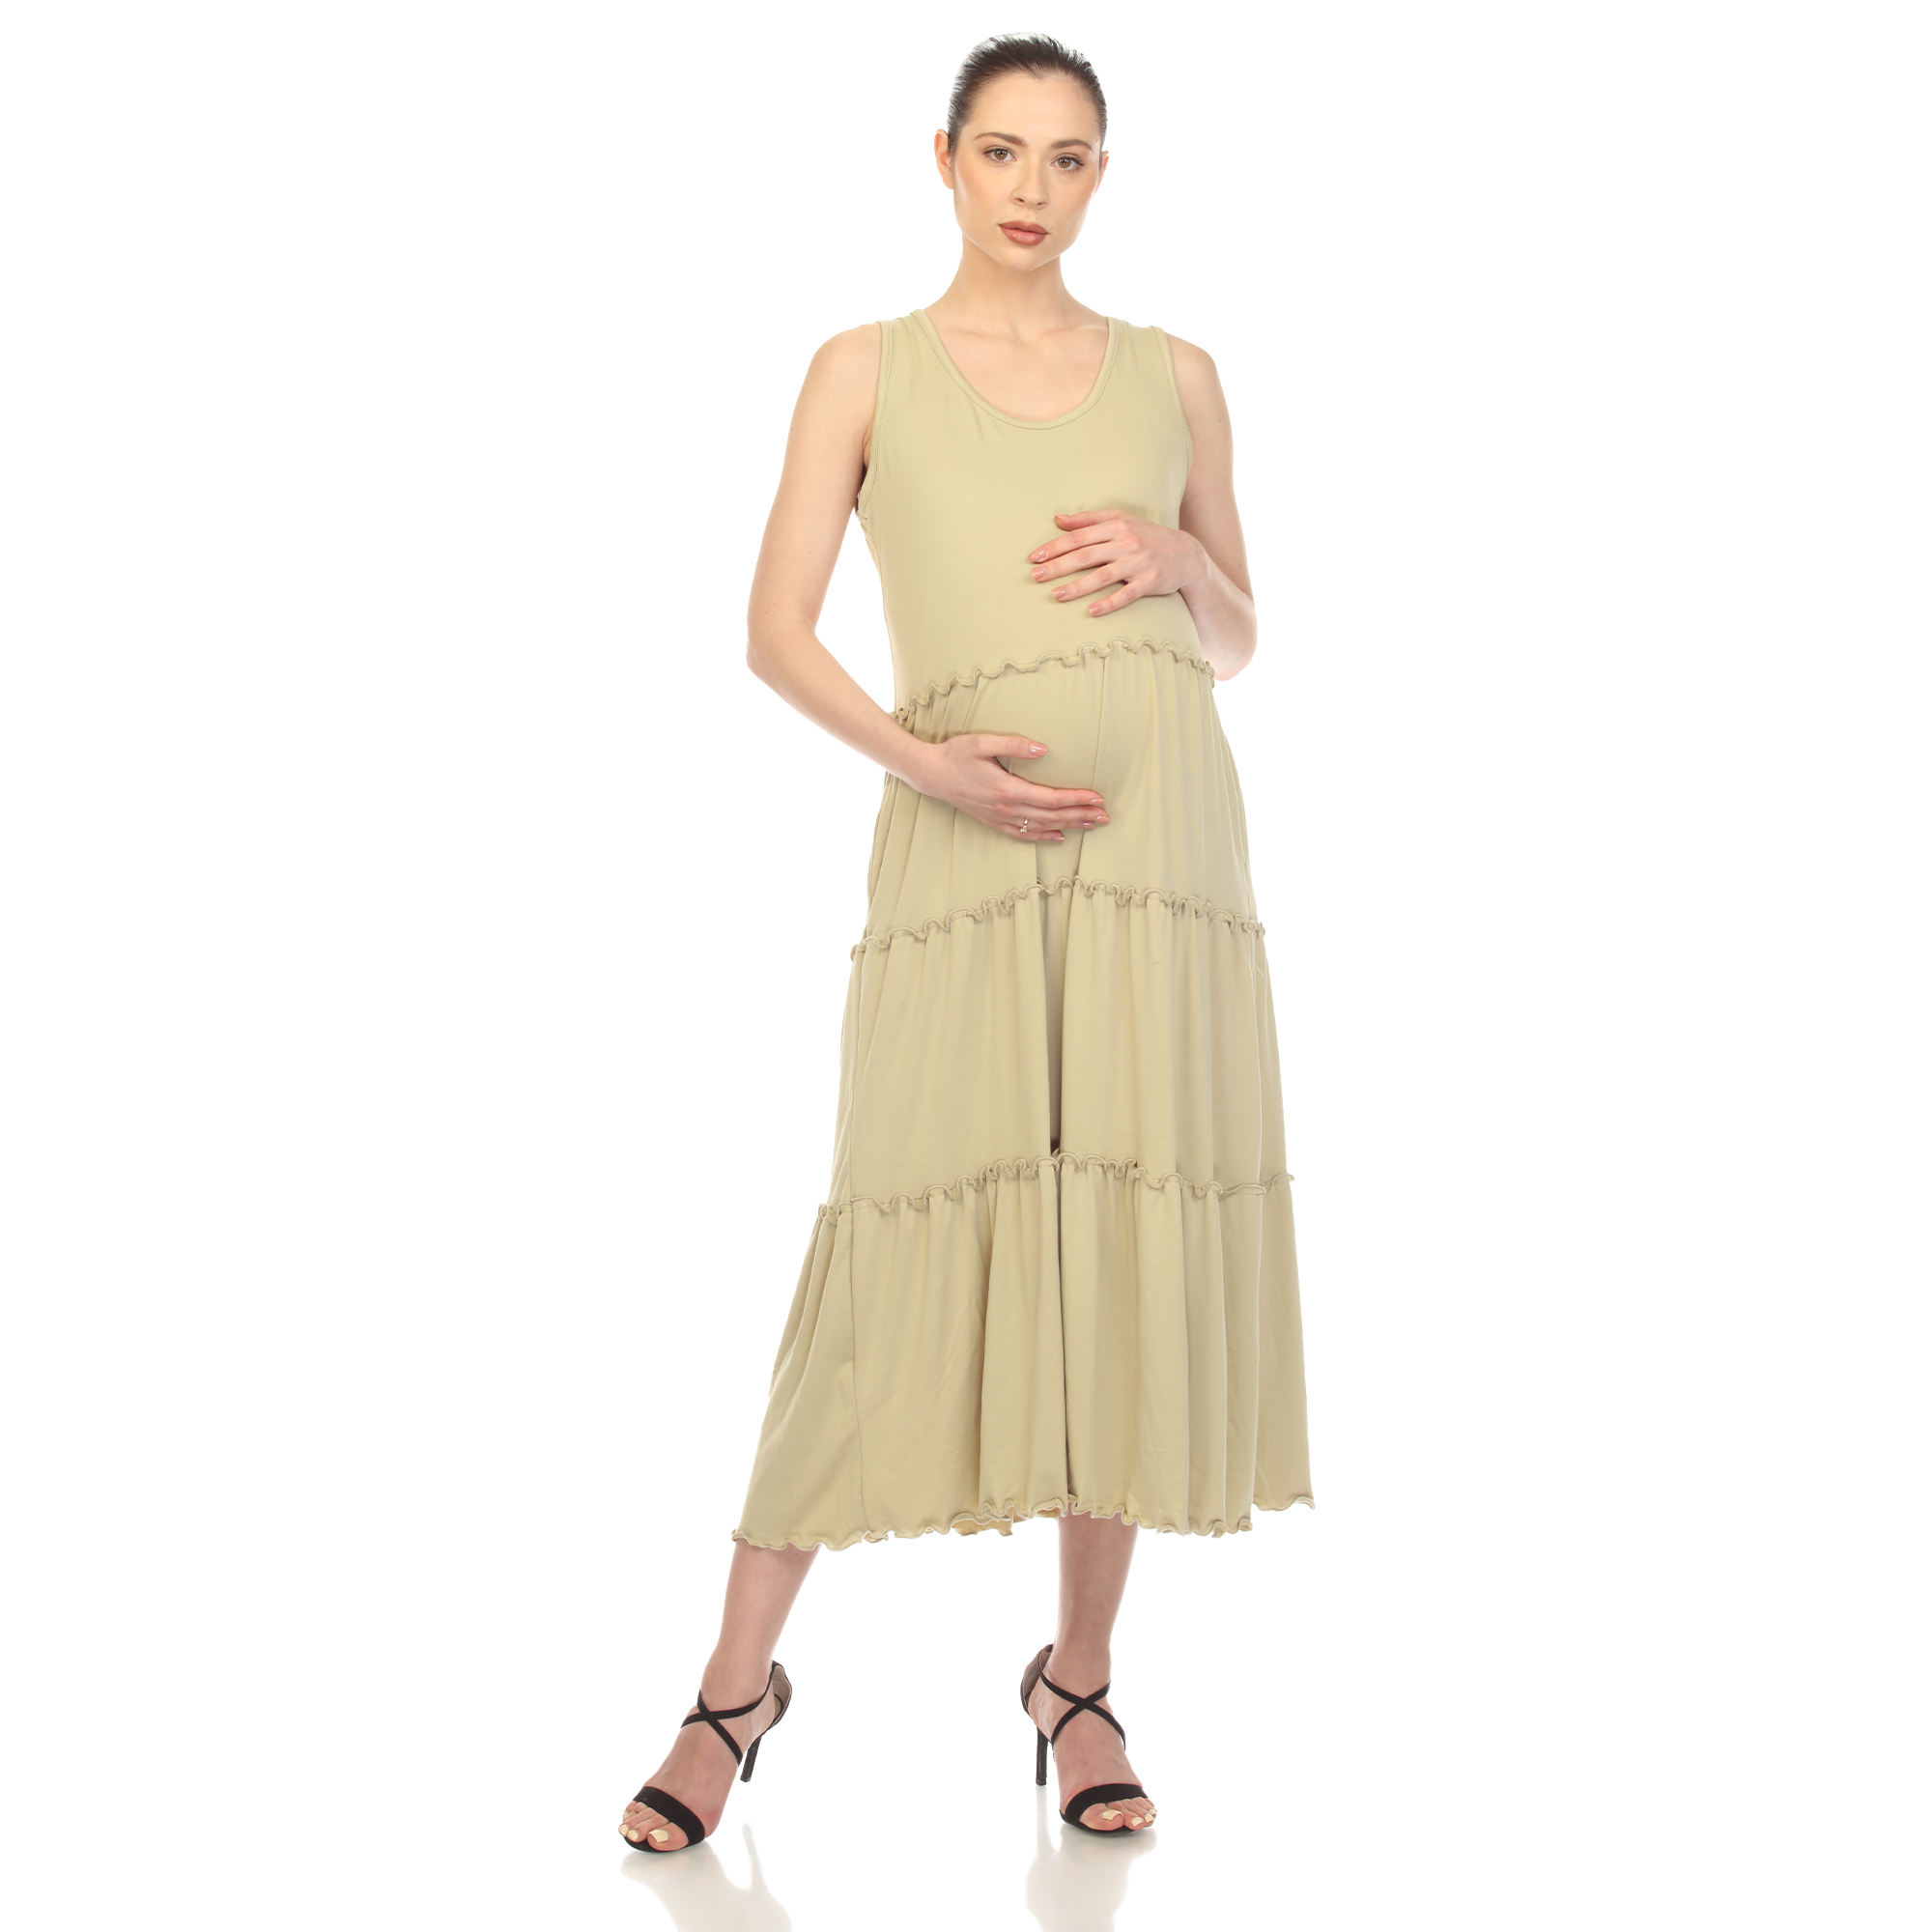 White Mark Women's Maternity Scoop Neck Tiered Midi Dress - Pale Olive, X-Large